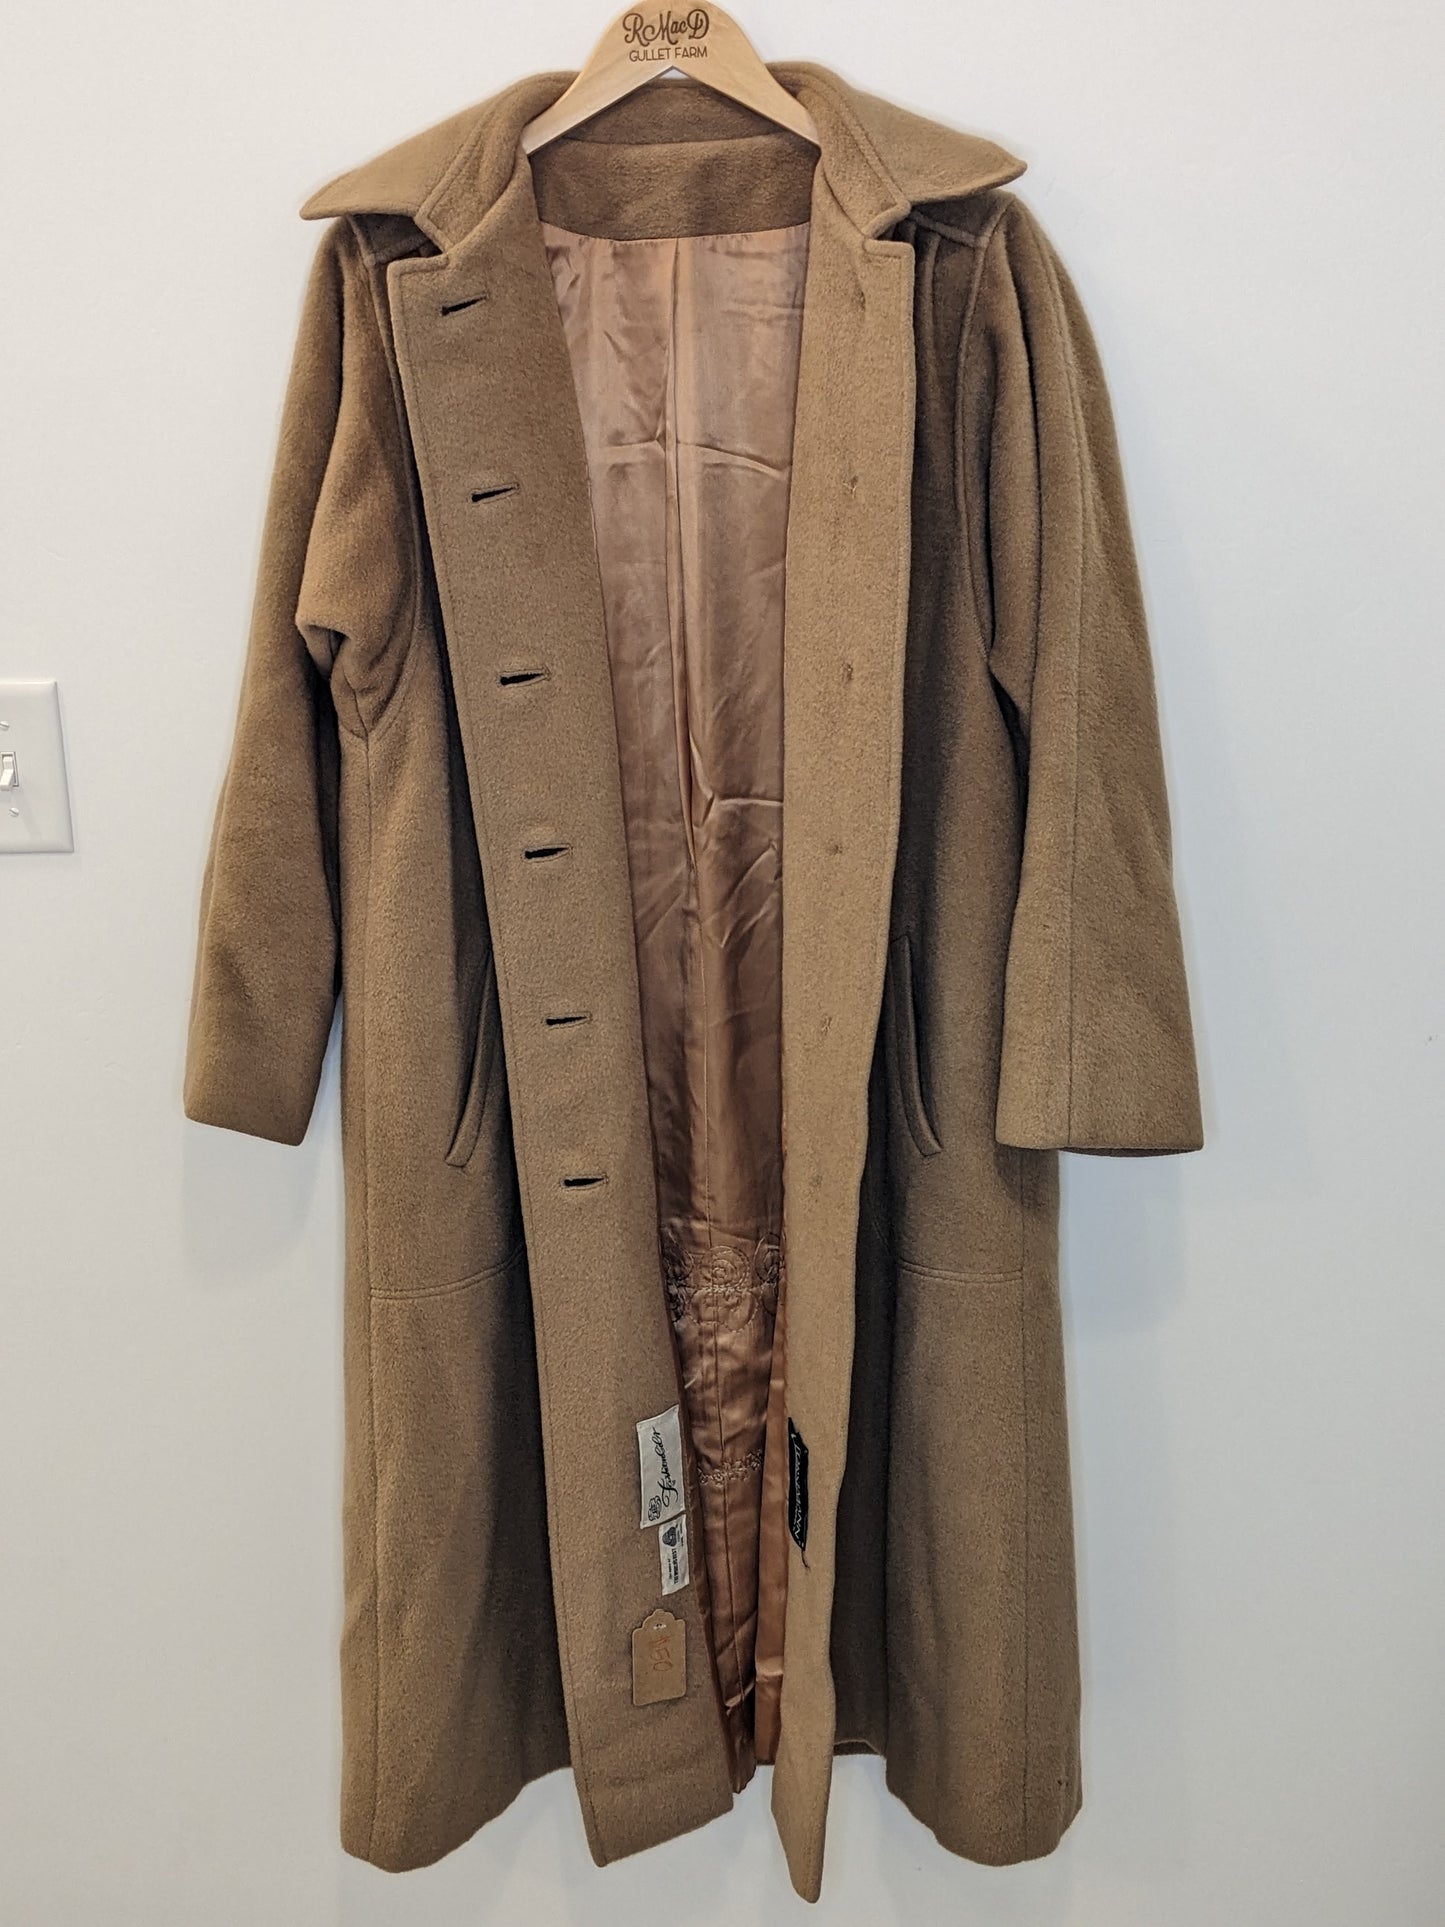 Vintage Union Made Forstmann Camel Hair Long Trench Coat